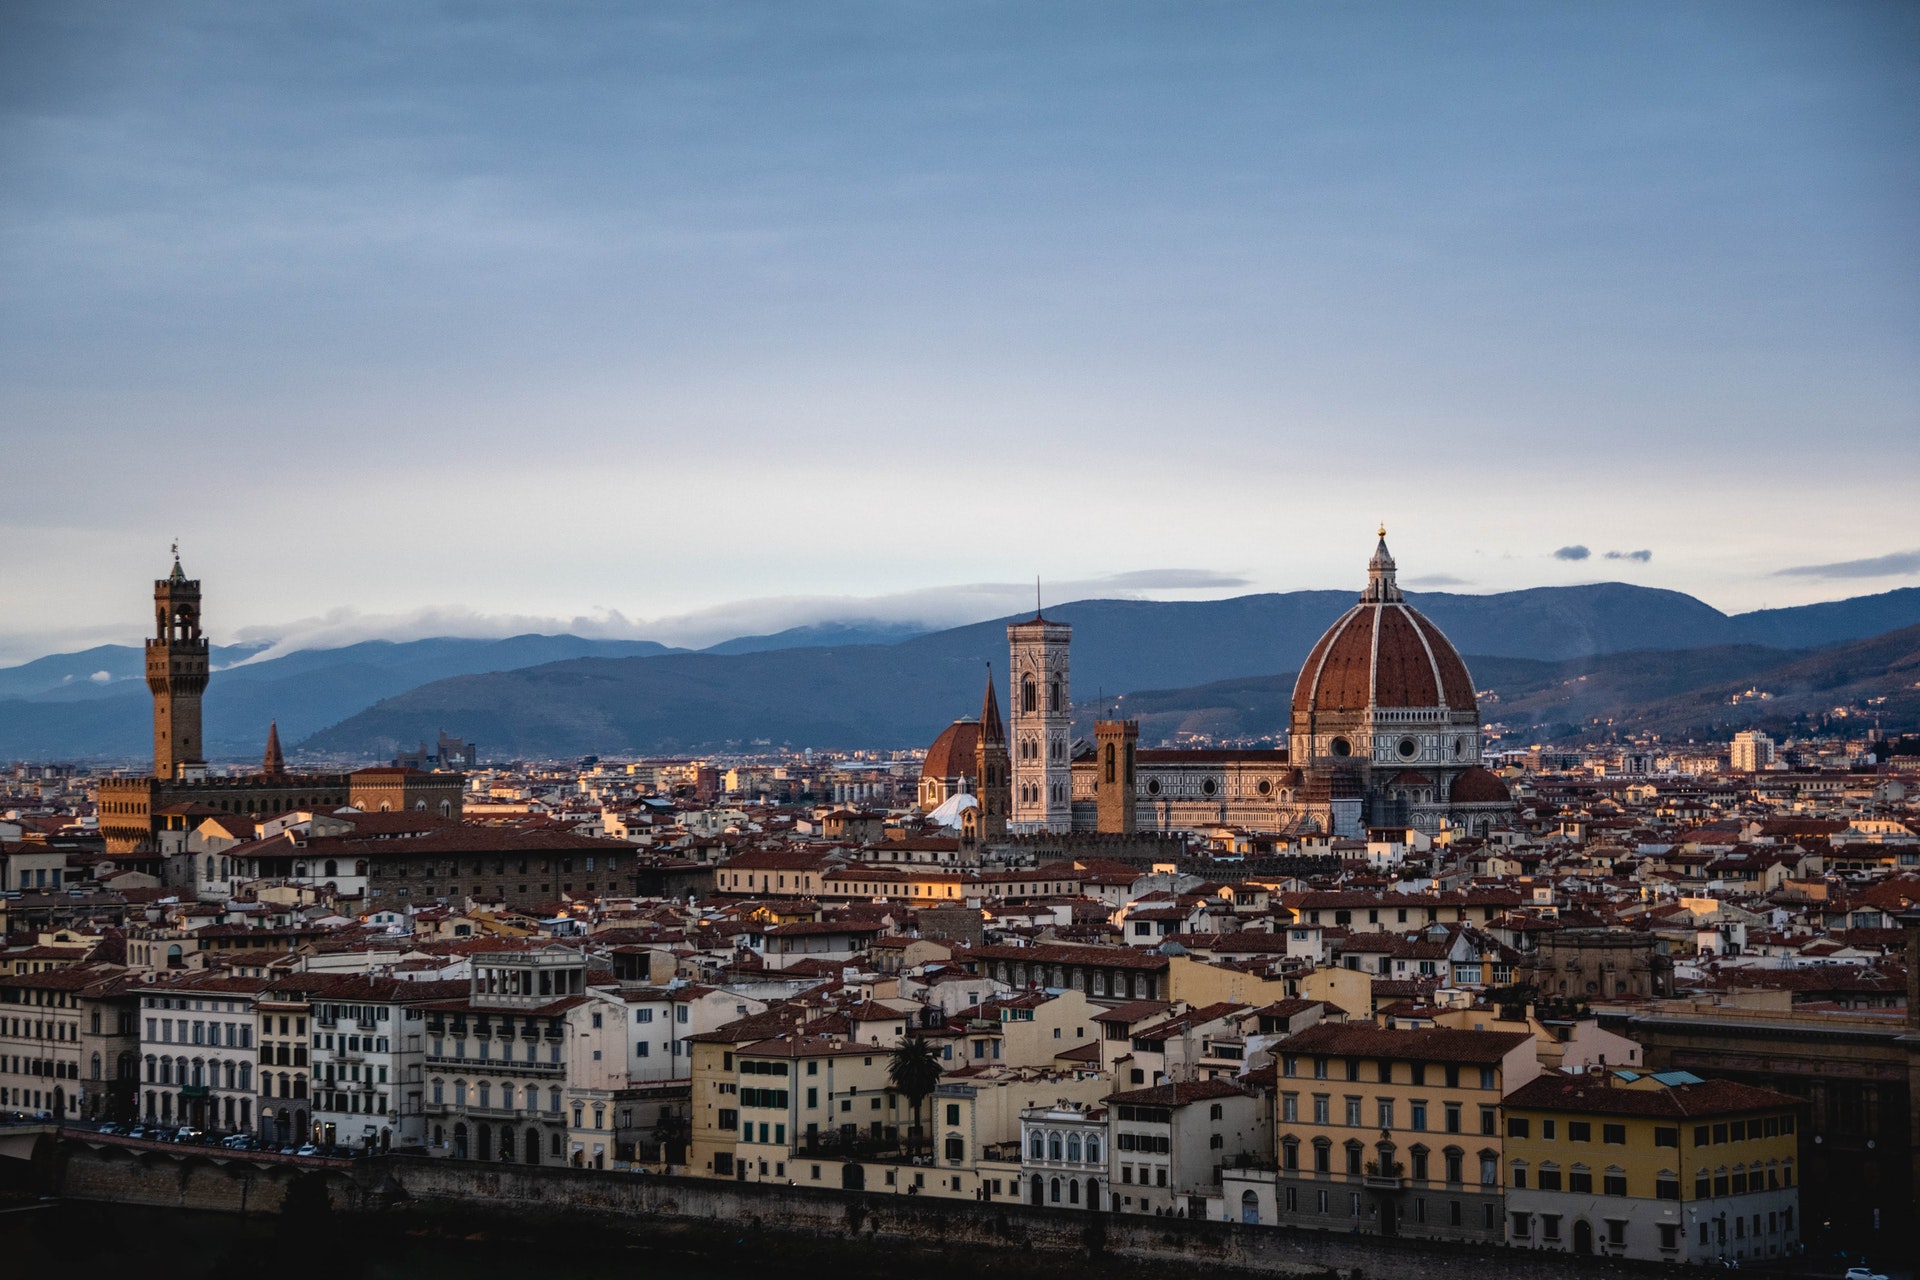 Let’s explore Florence + Tuscany